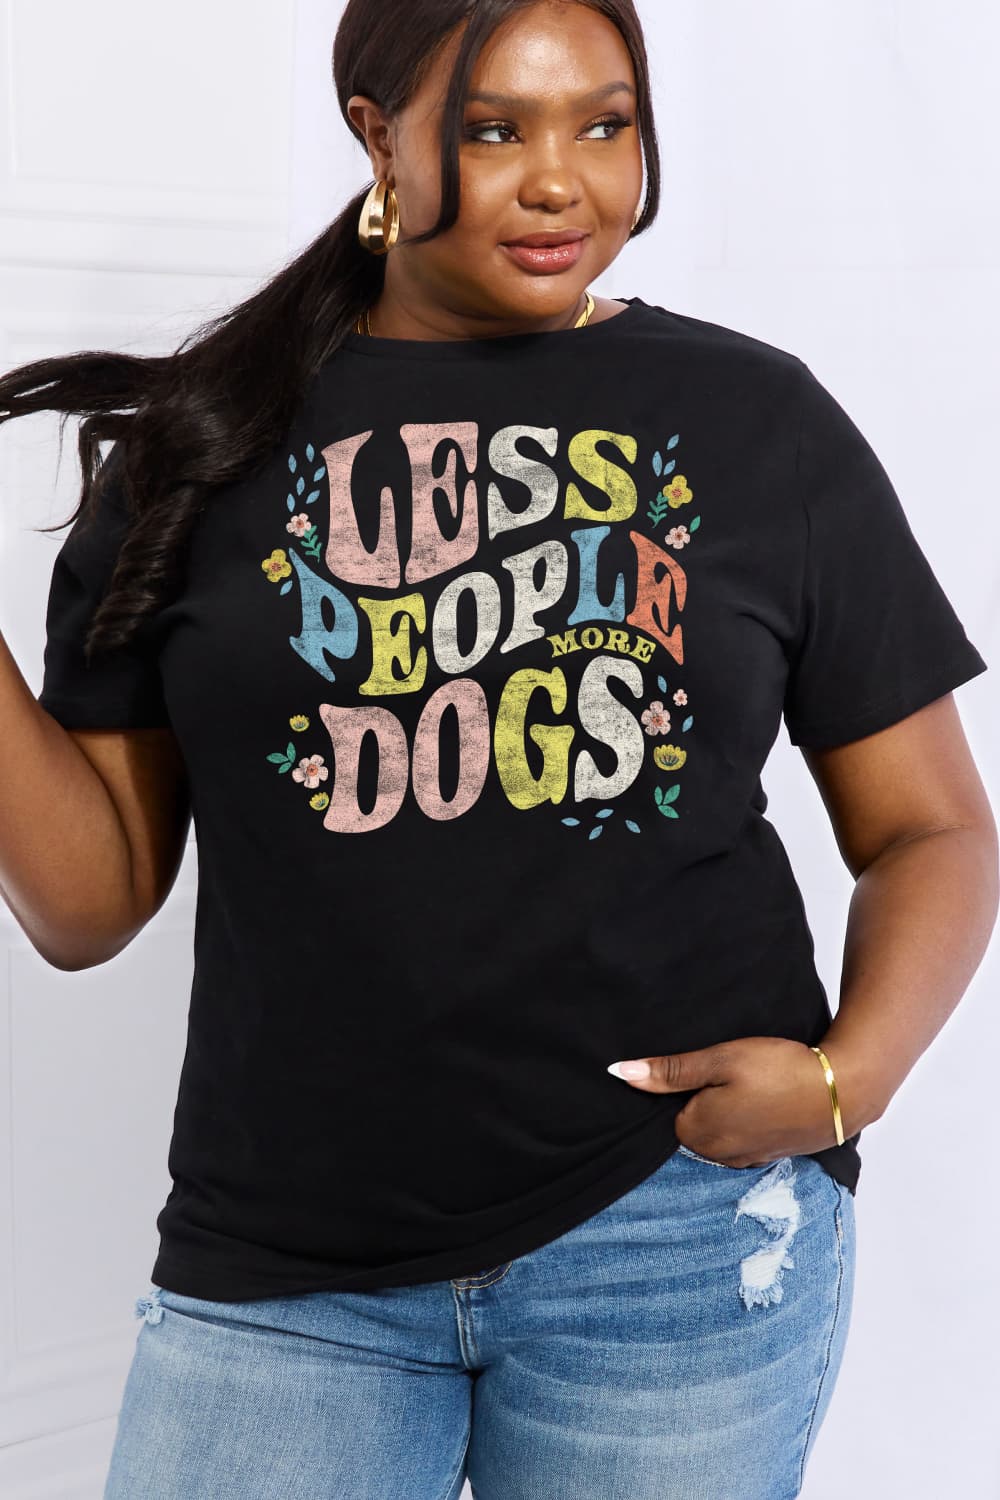 Simply Love Full Size LESS PEOPLE MORE DOGS Graphic Cotton T-Shirt